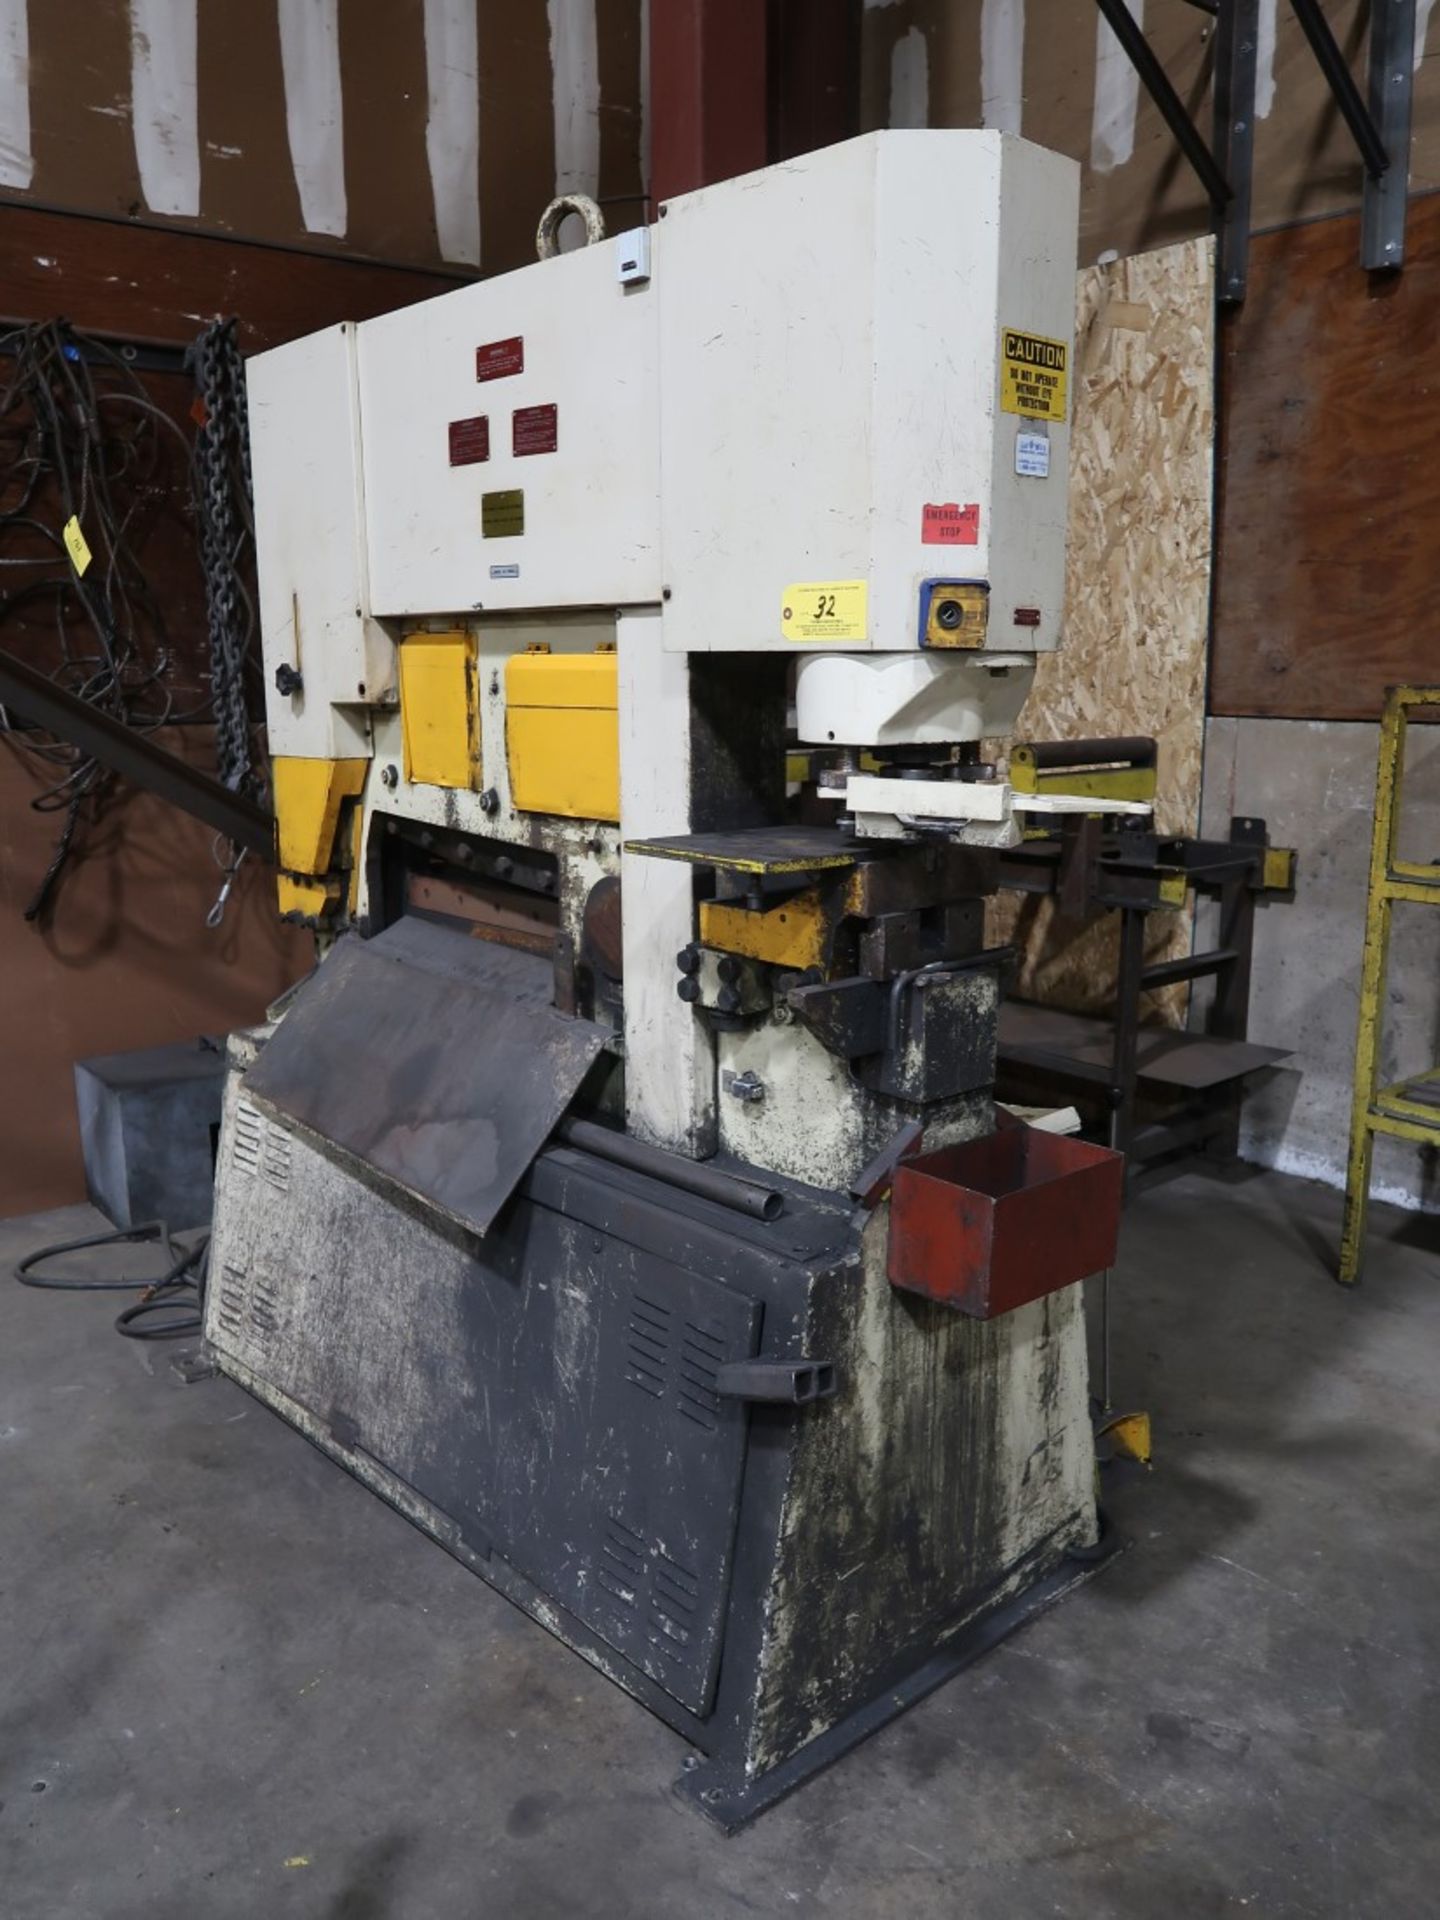 1995 Geka Hydracrop 110A Ironworker, S/N 15798, Punch Head Replaced in 2020; Punching Tonnage 120 - Image 2 of 6